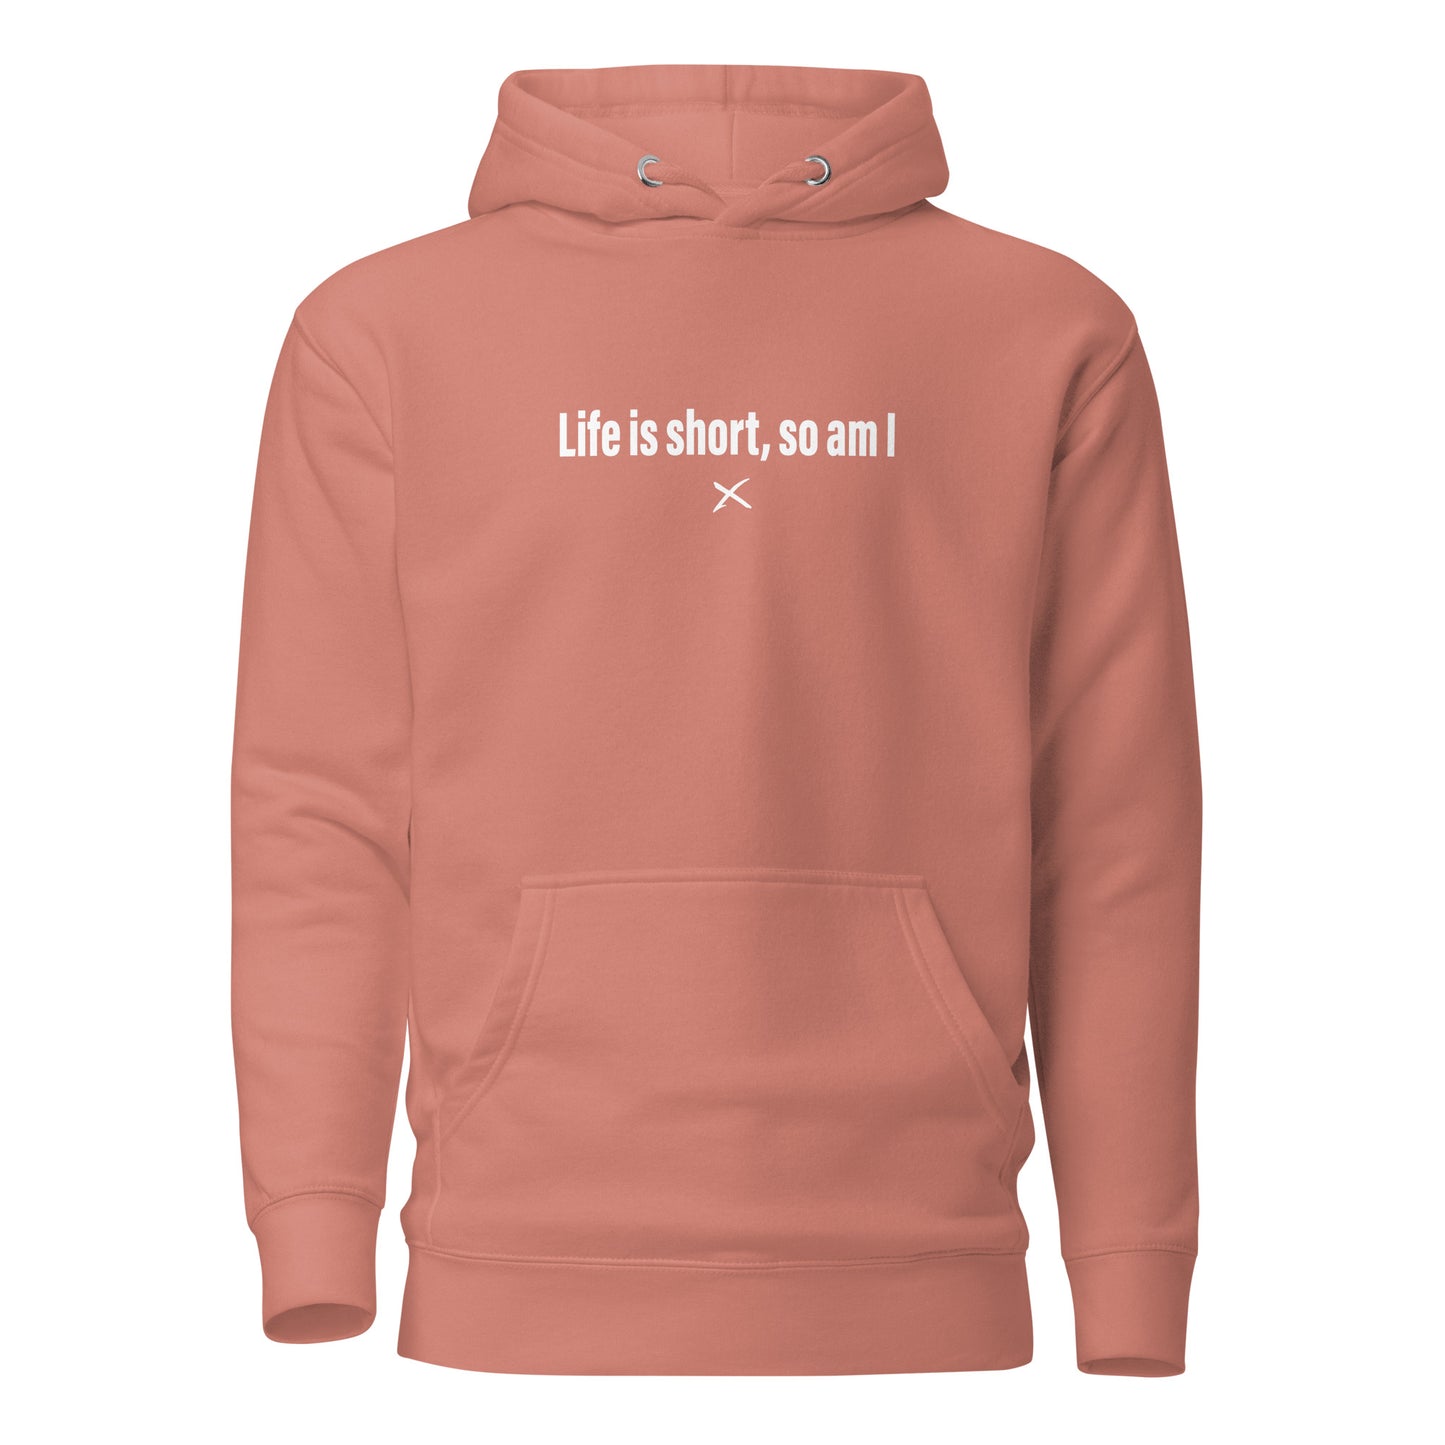 Life is short, so am I - Hoodie